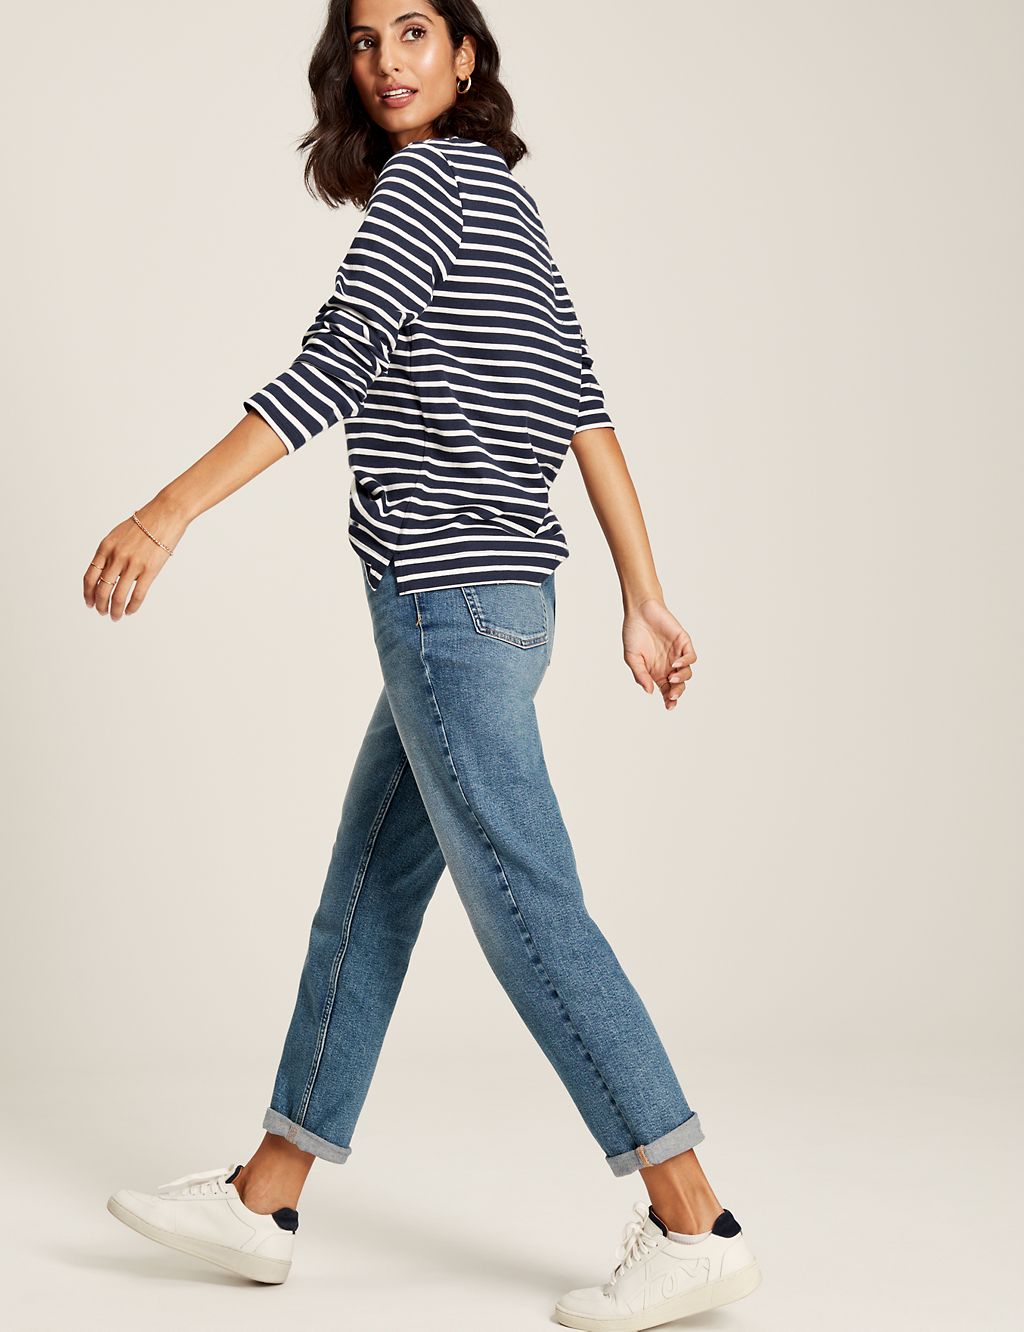 Pure Cotton Striped Top | Joules | M&S